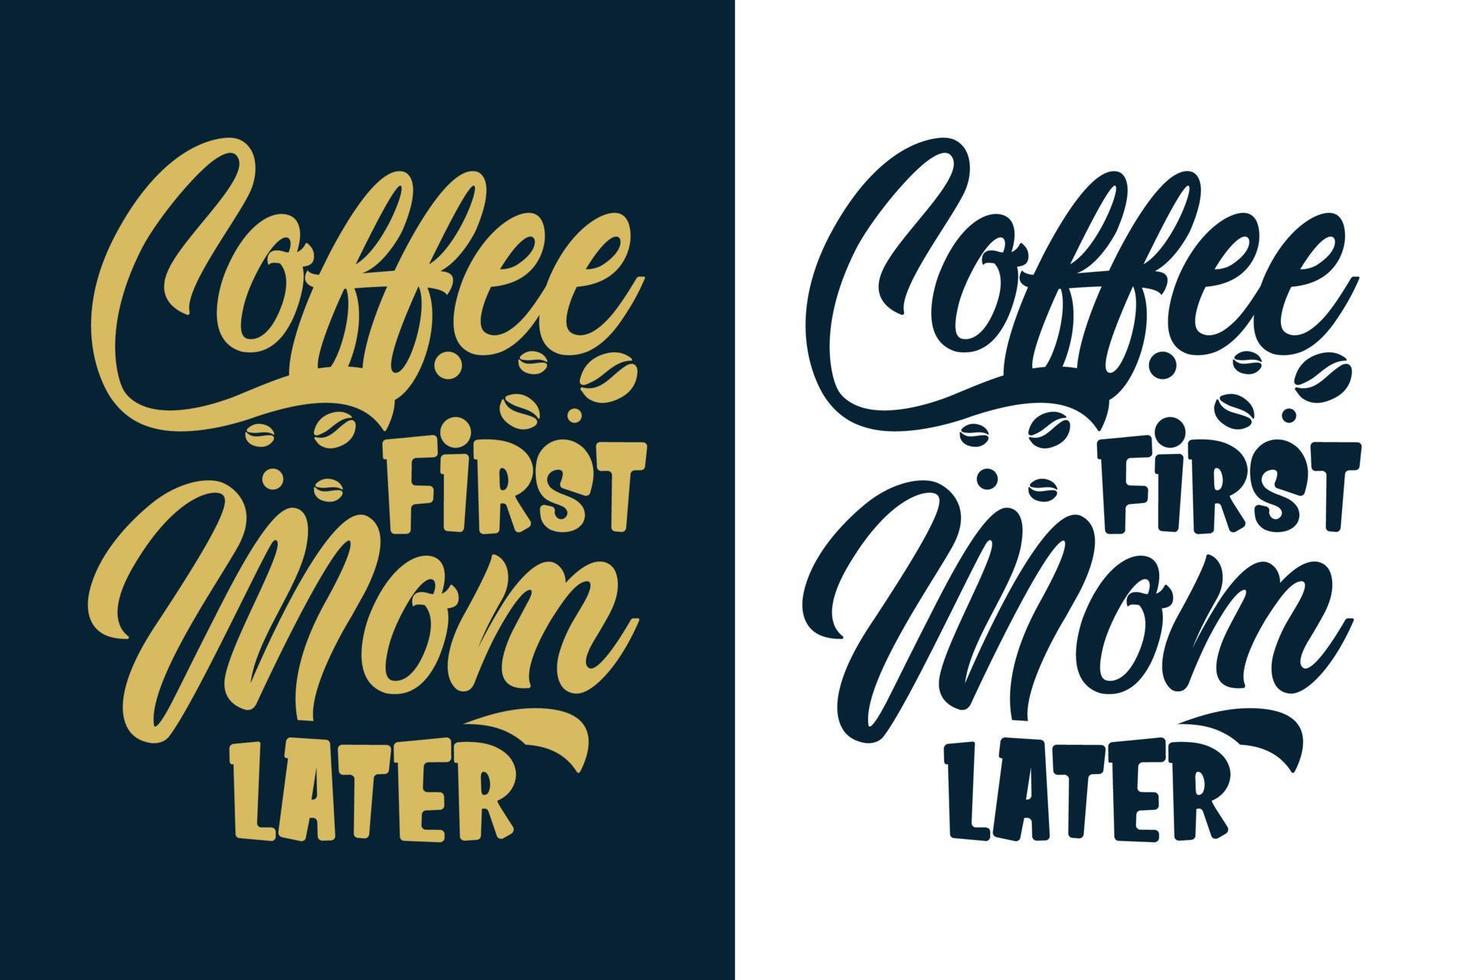 Coffee first mom later typography colorful coffee quotes design for t shirt and merchandise vector